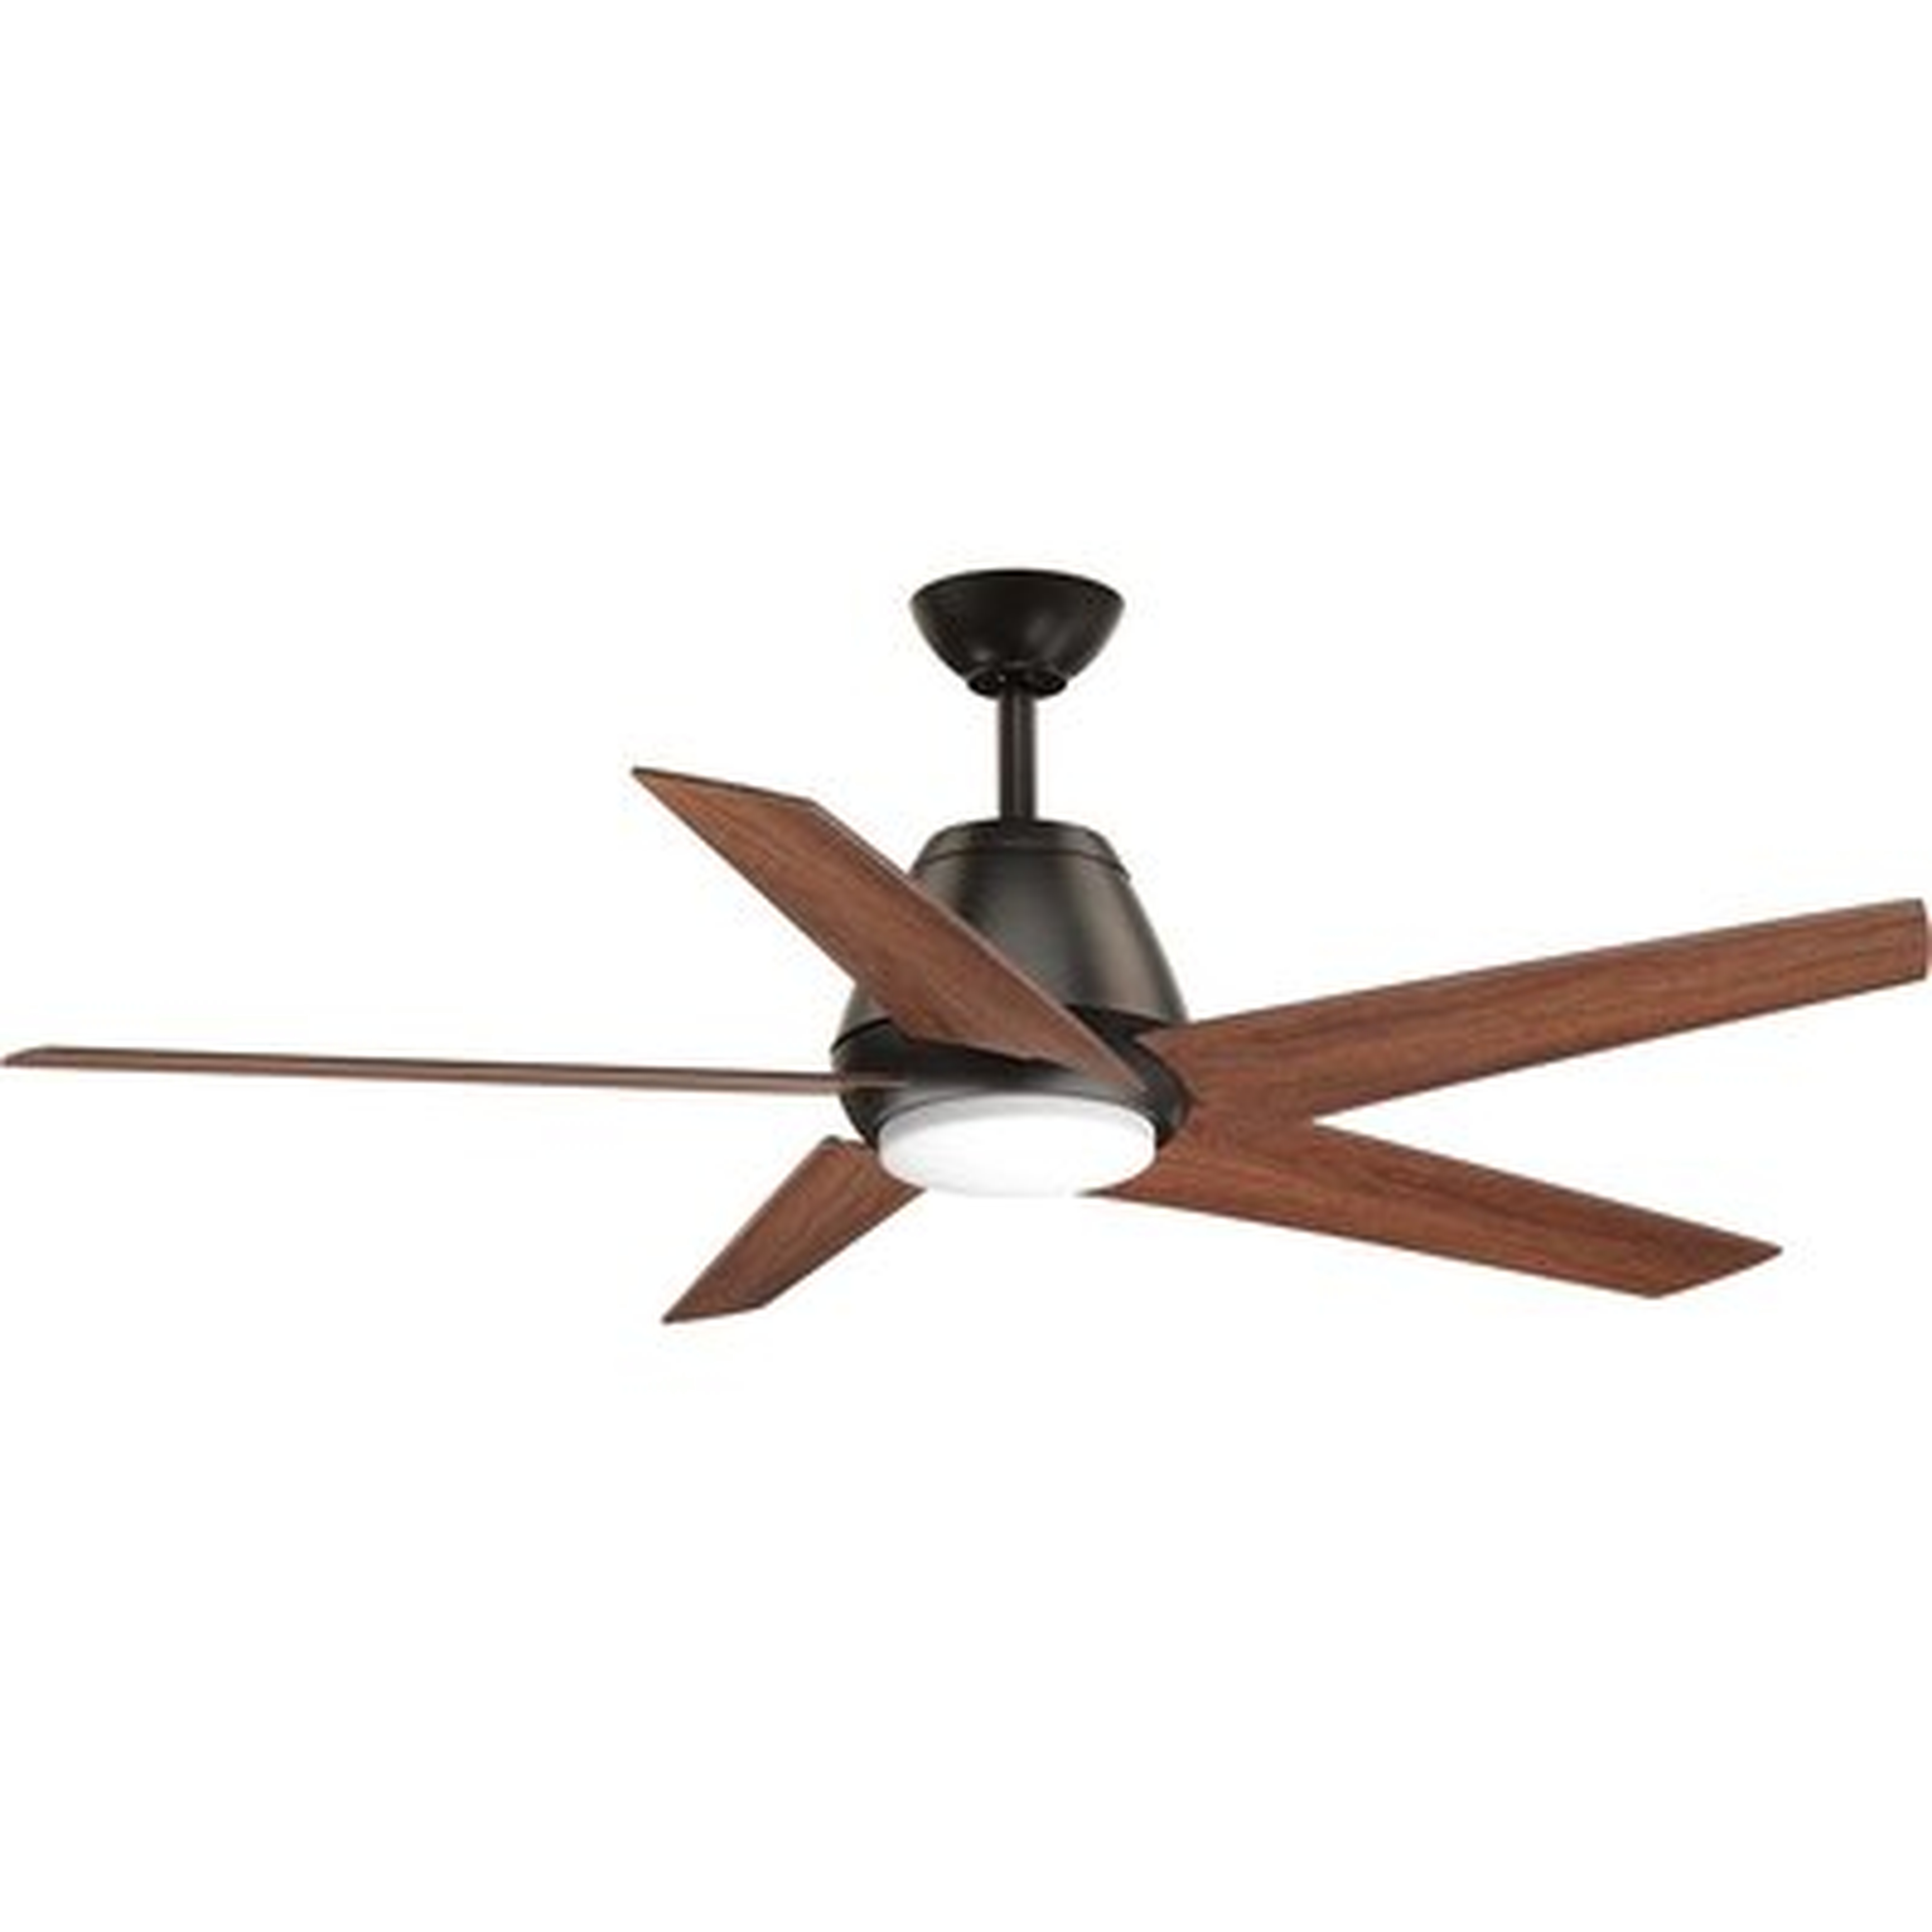 54" Grigsby 5 - Blade LED Standard Ceiling Fan with Remote Control and Light Kit Included - AllModern